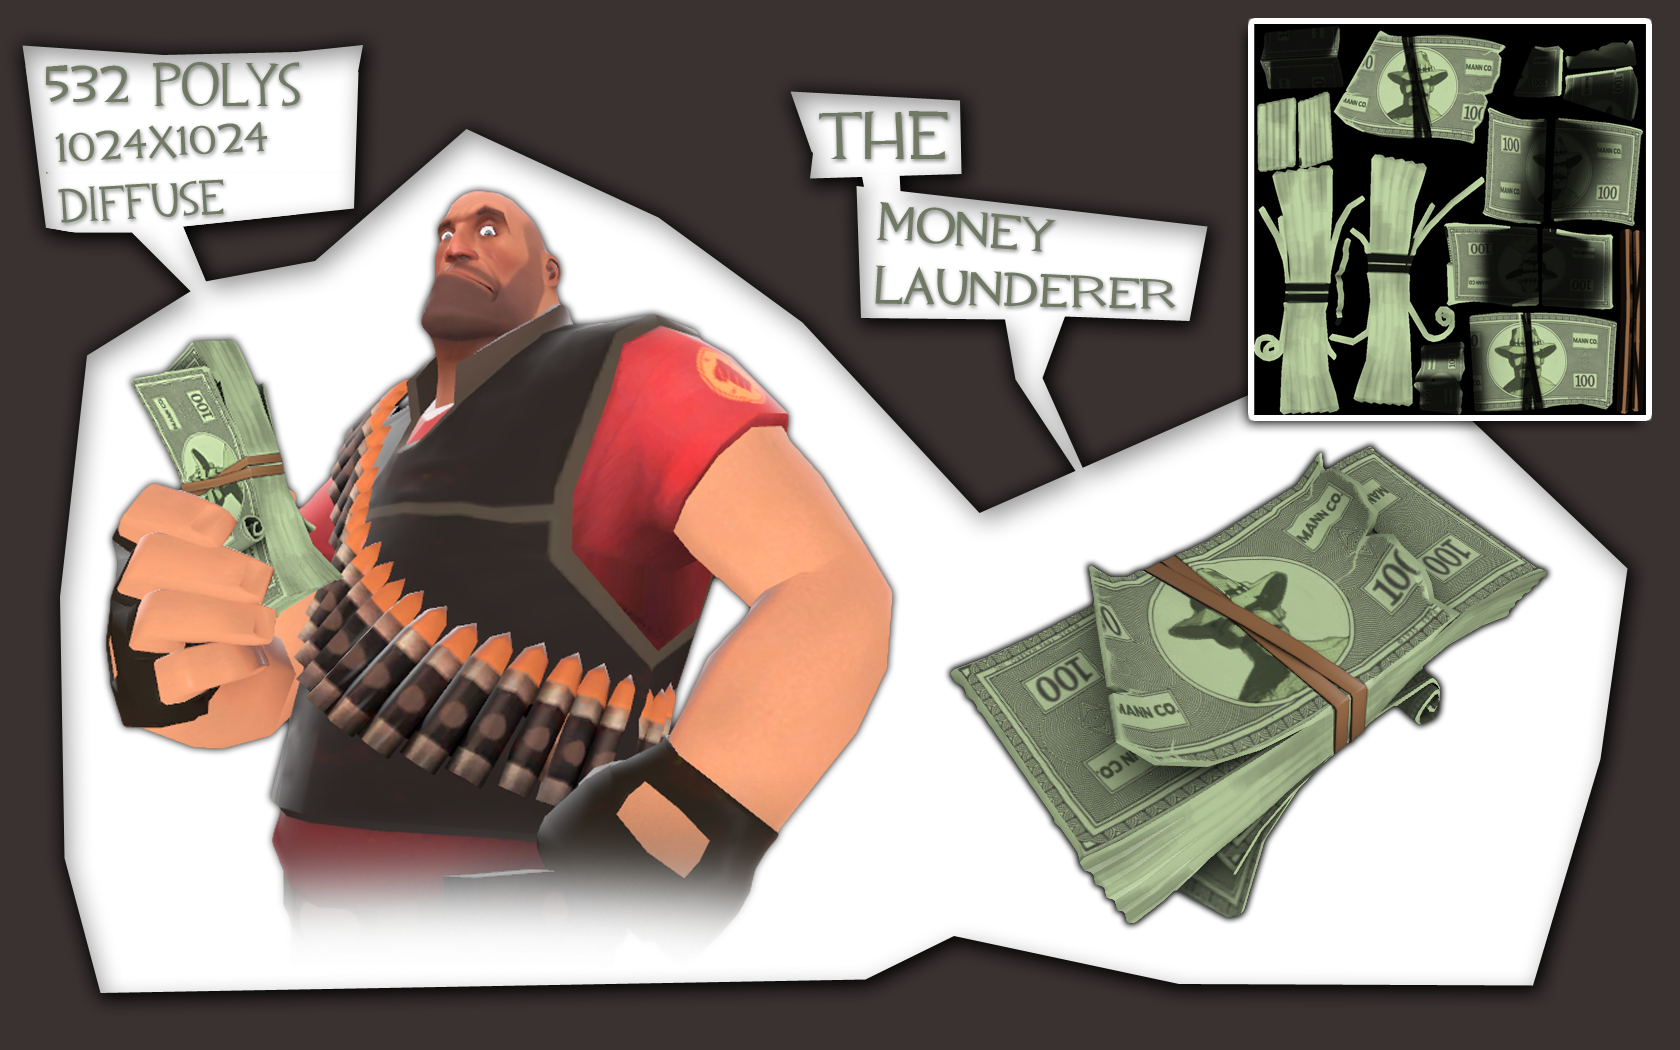 the_money_launderer_by_facepunchsexyrobot-d48ftc1.png